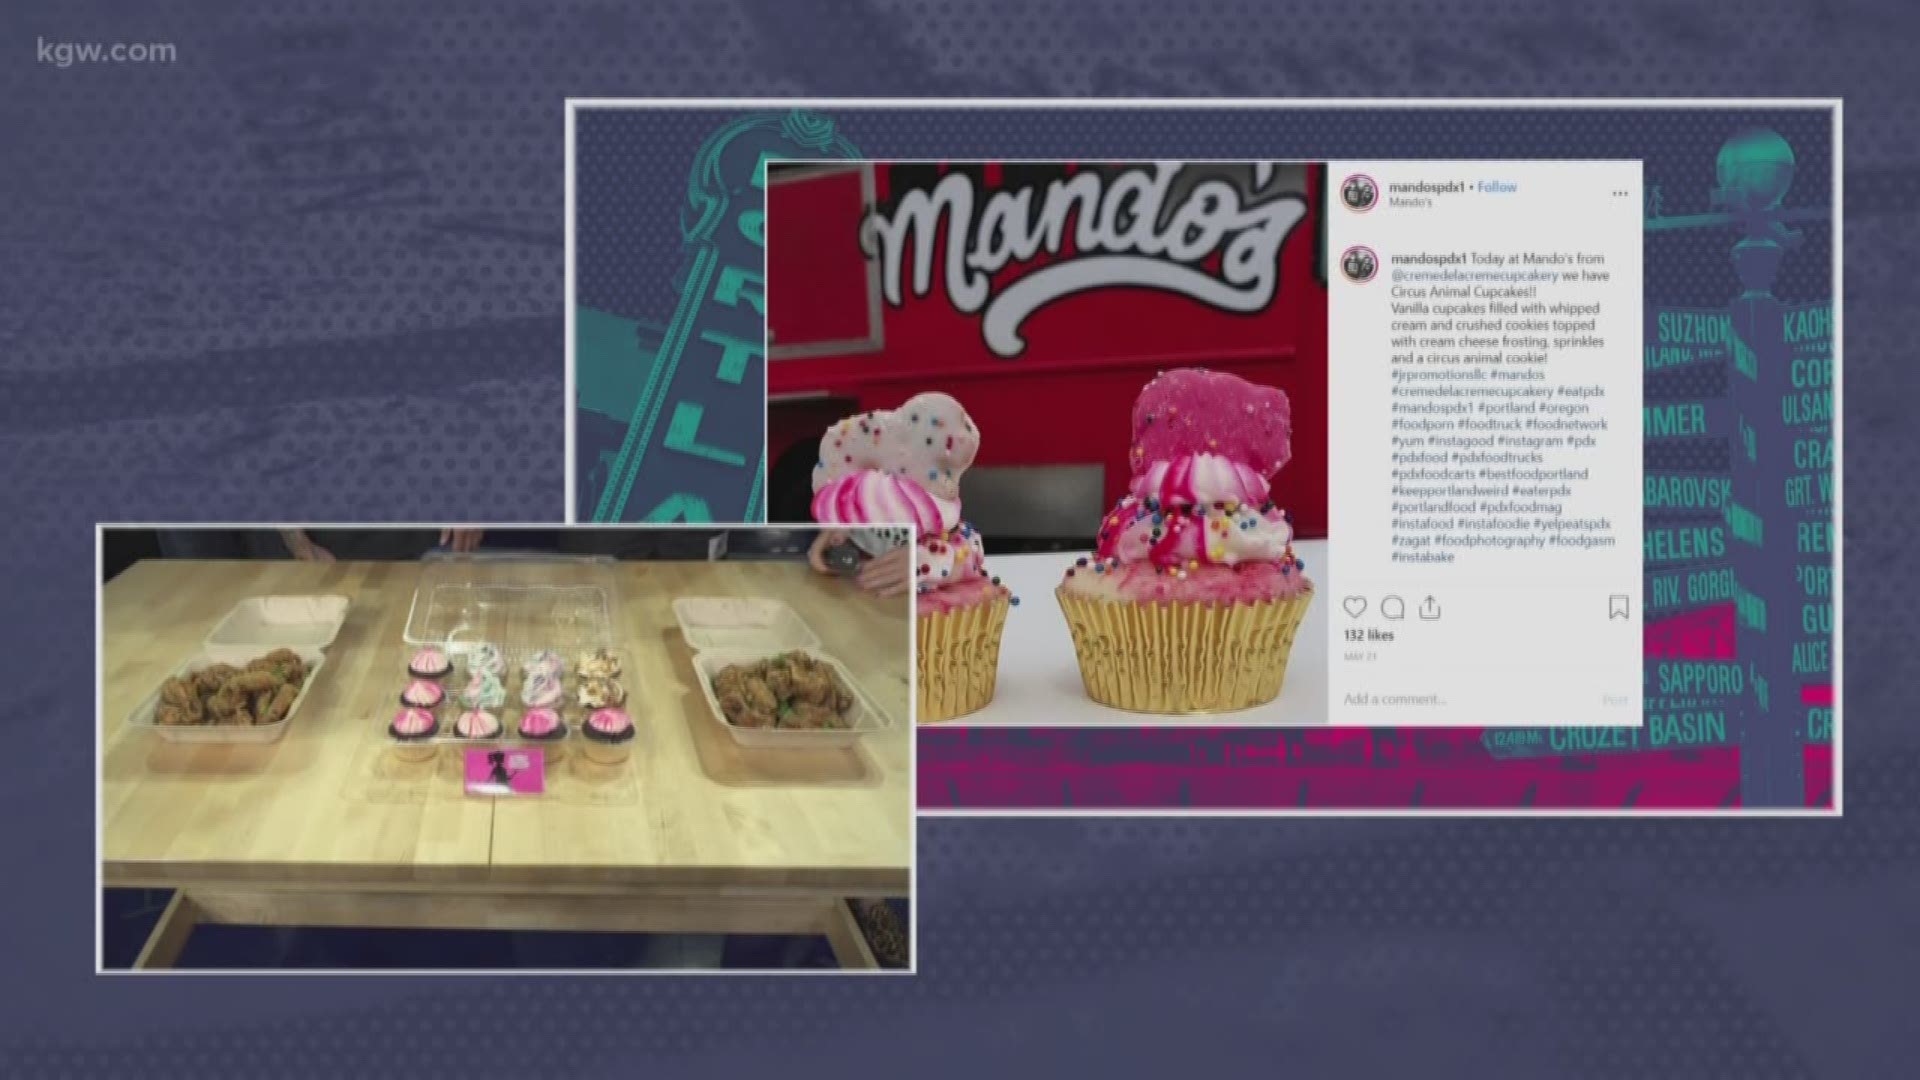 Mando's is throwing a one-year anniversary party with pop-up shops, cupcakes and wings! Plus, they're getting ready to open a second food truck. 
#TonightwithCassidy